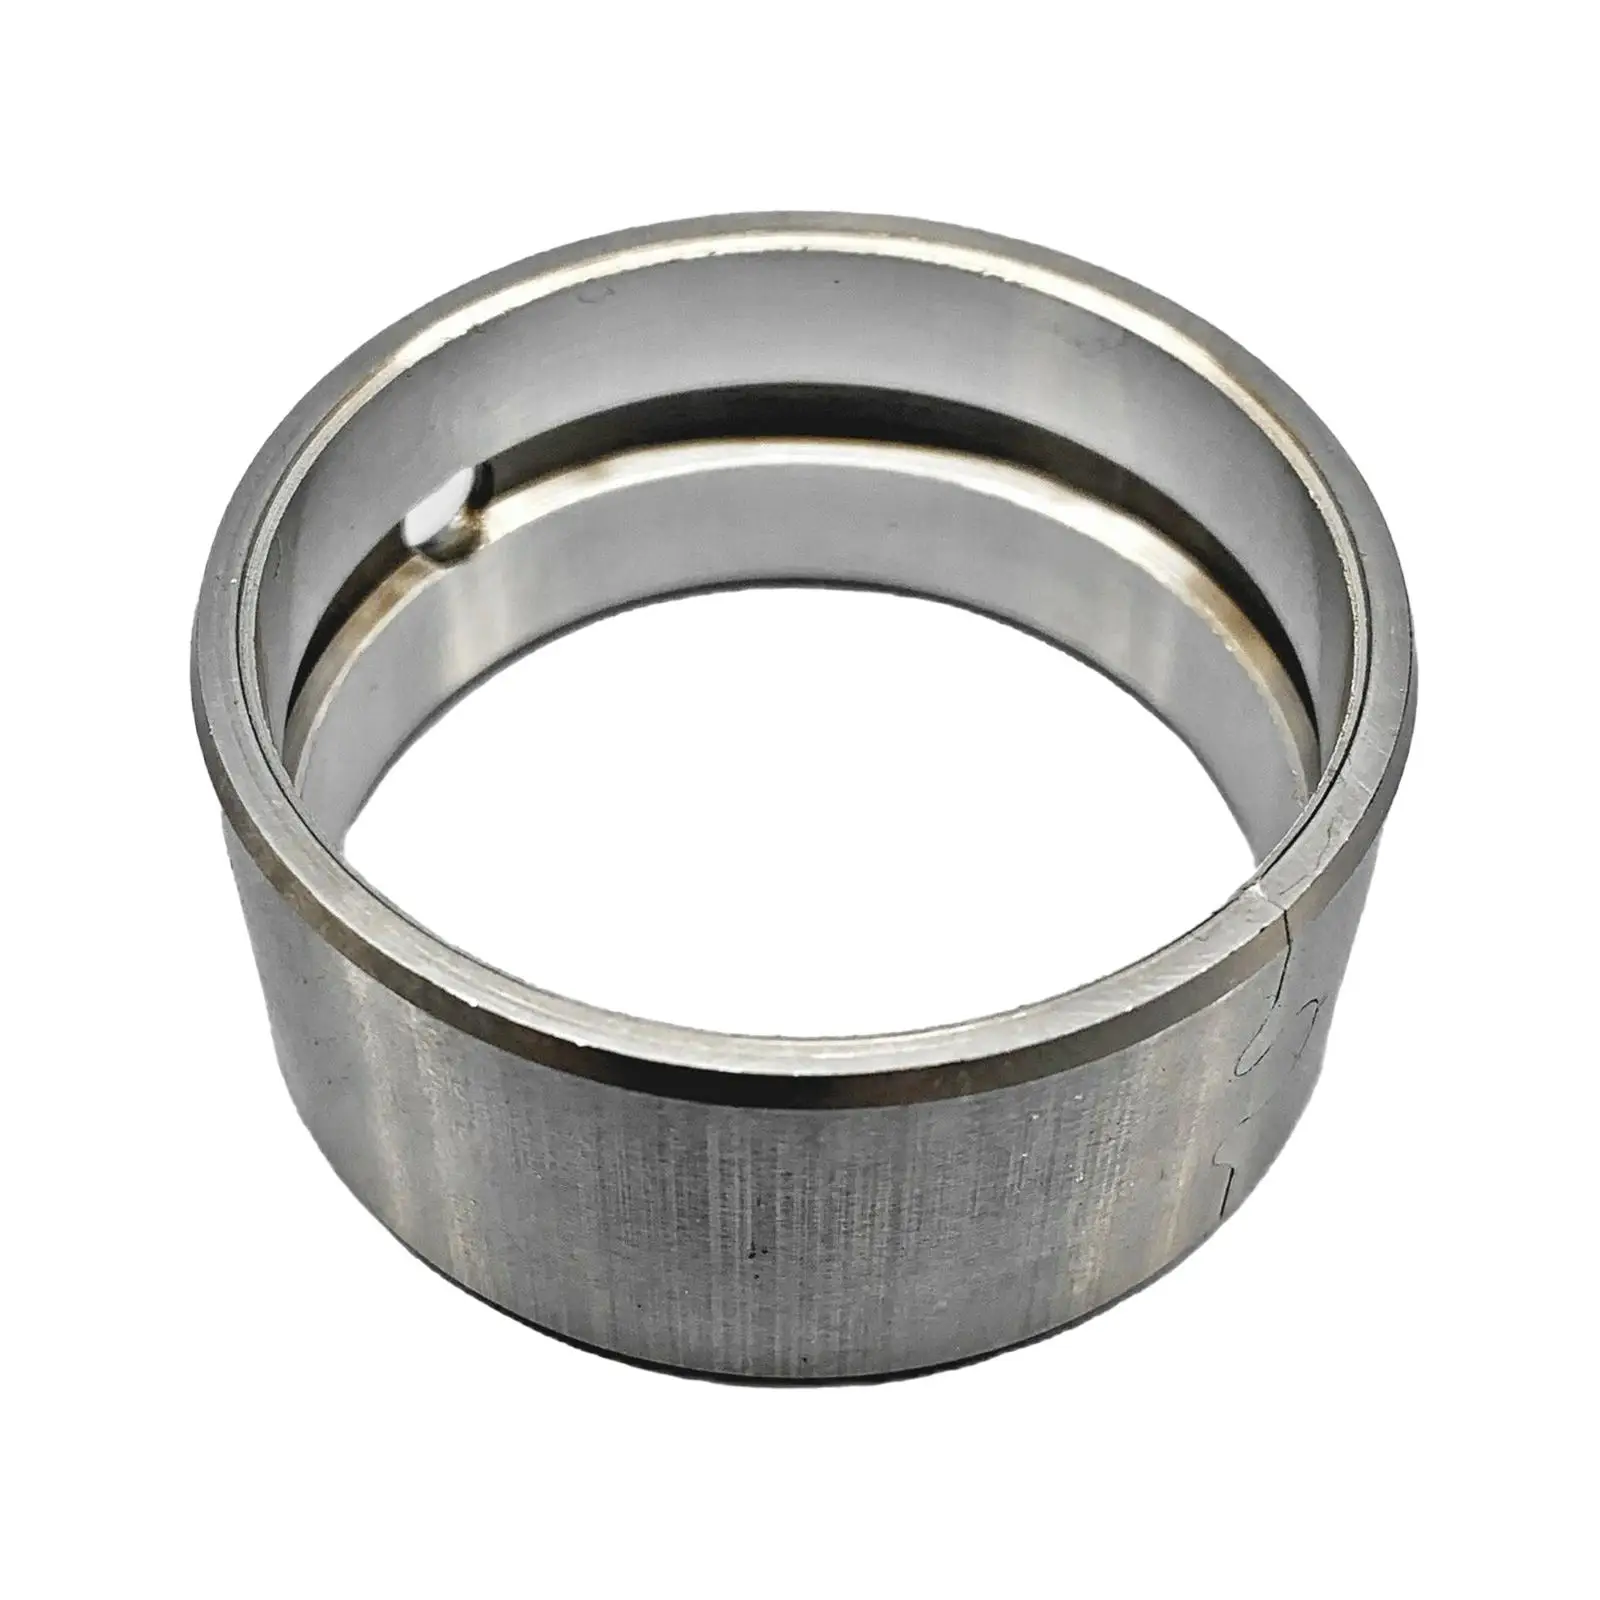 Crank Main Bearing Bushing Component Replaces Durable for 570 Motors 450 Engines